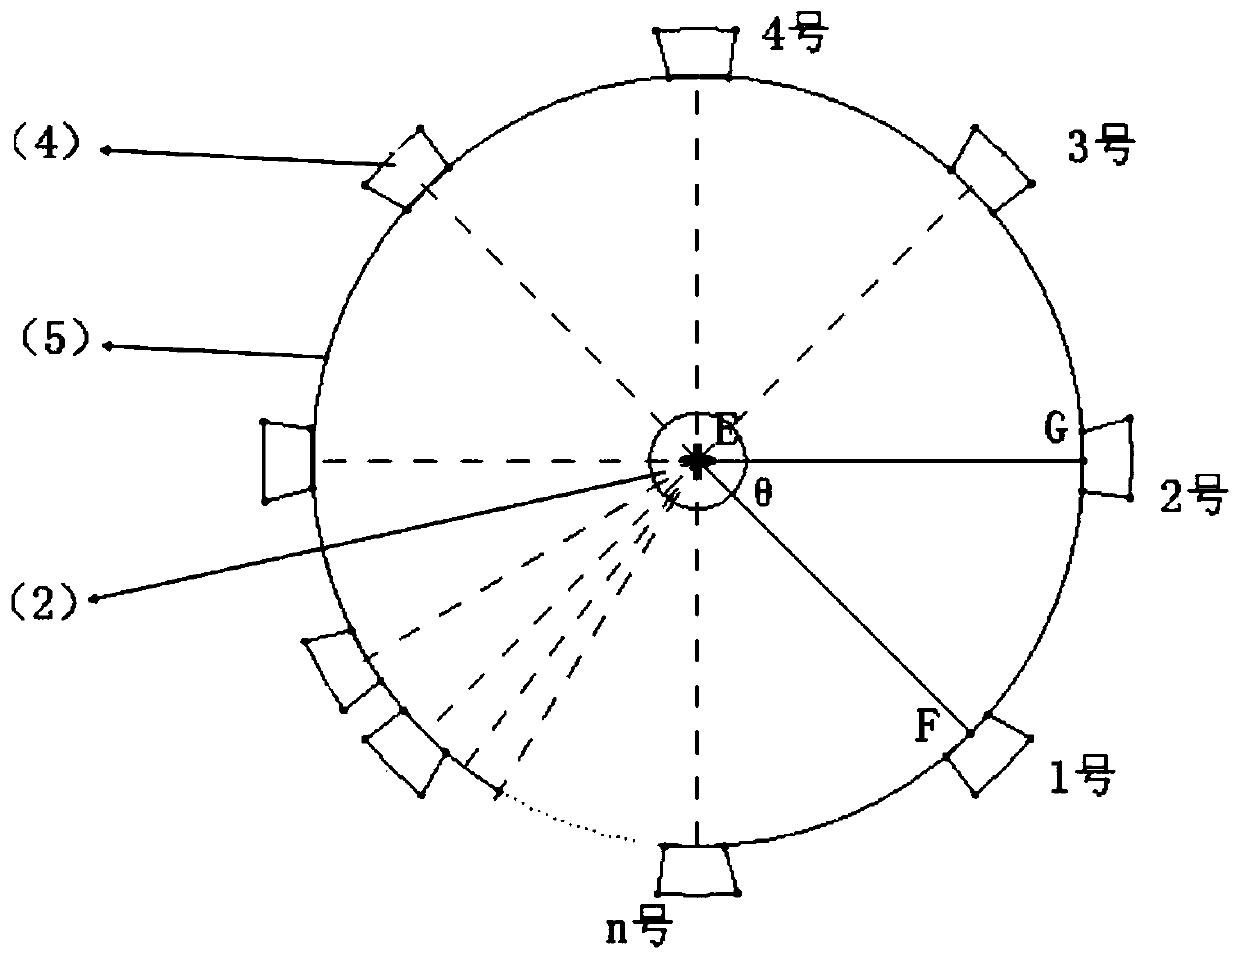 A Method of DC Controlling Magnetic Monopole Rotation for Segmented Arc Control